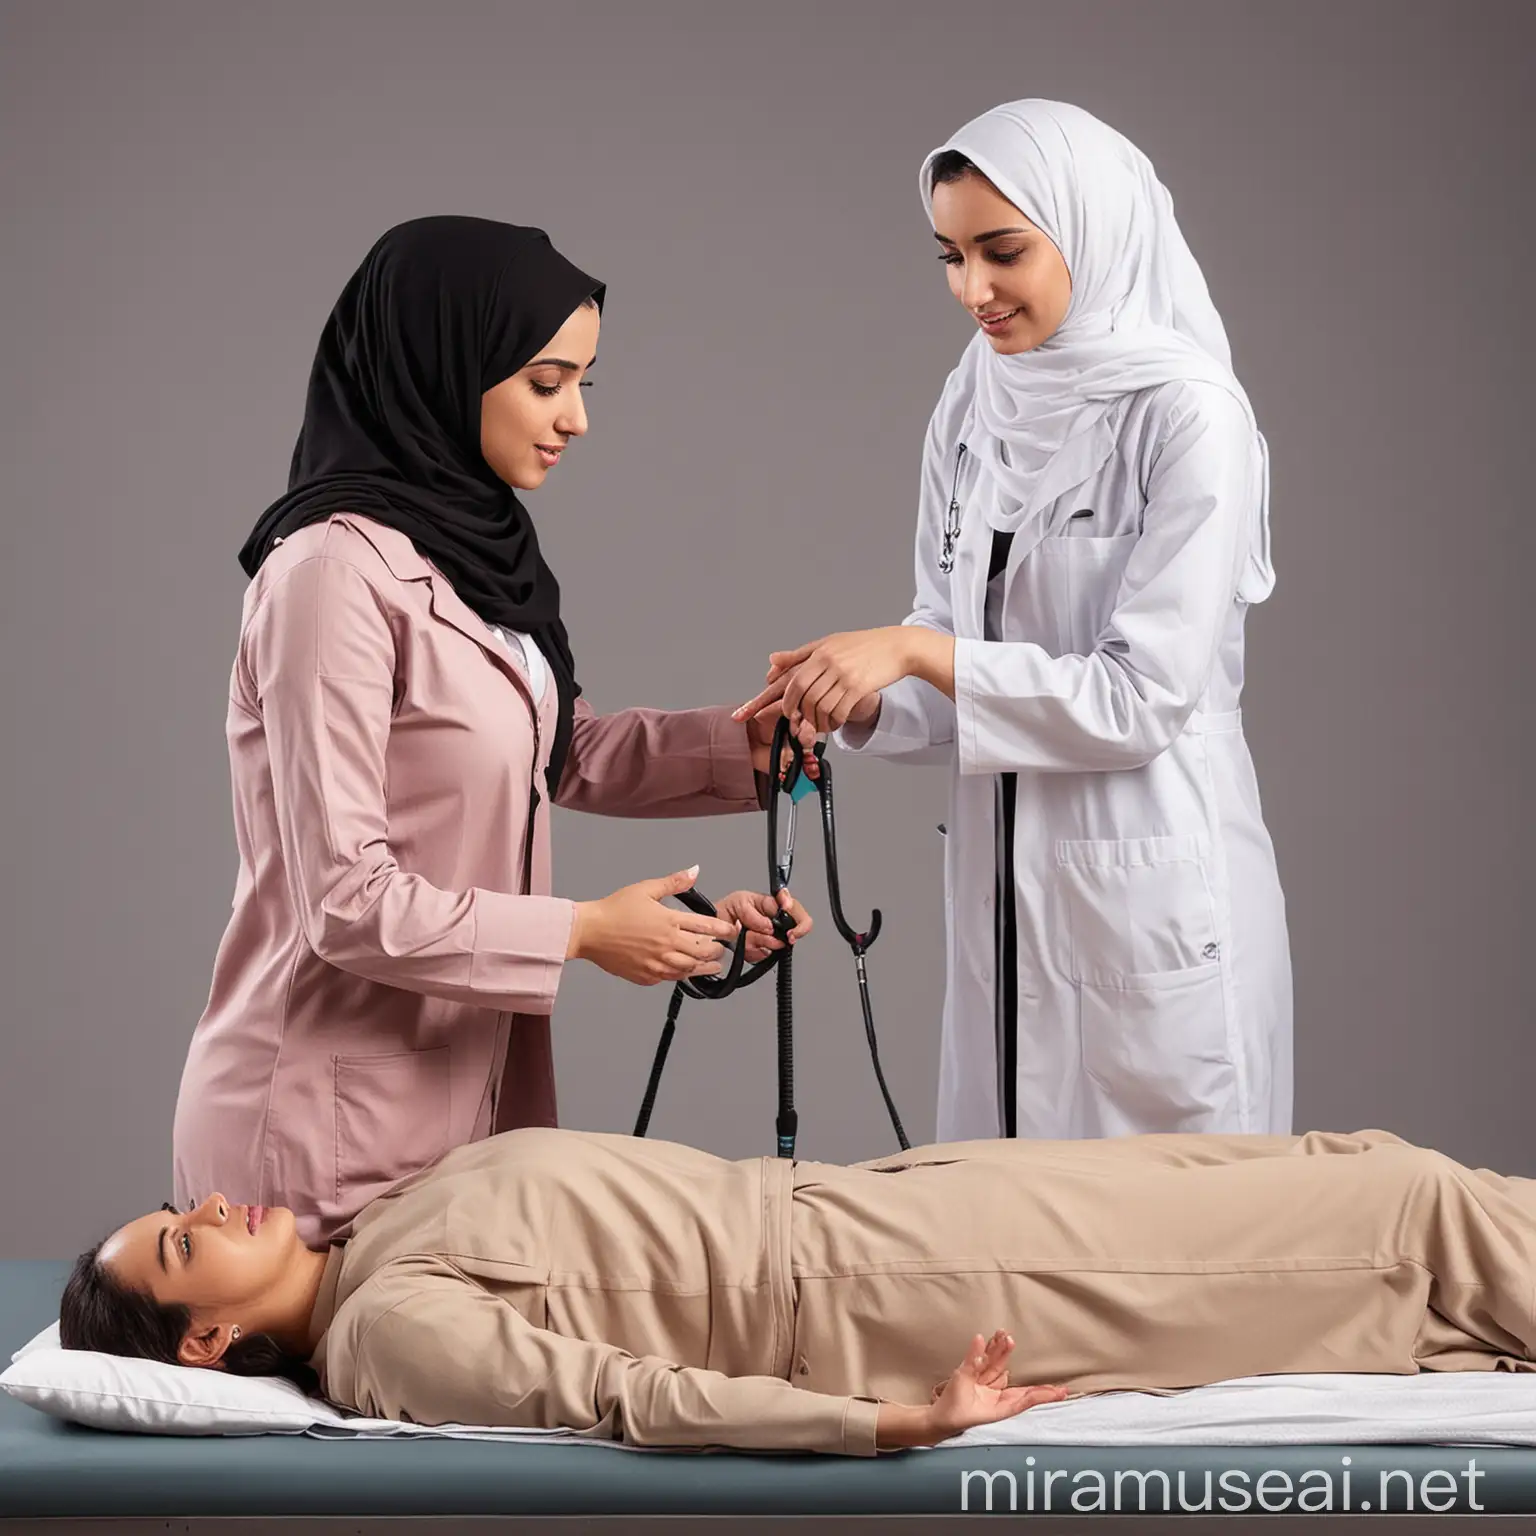 Arabic Female Doctor in Hijab Providing Physical Therapy to Patient